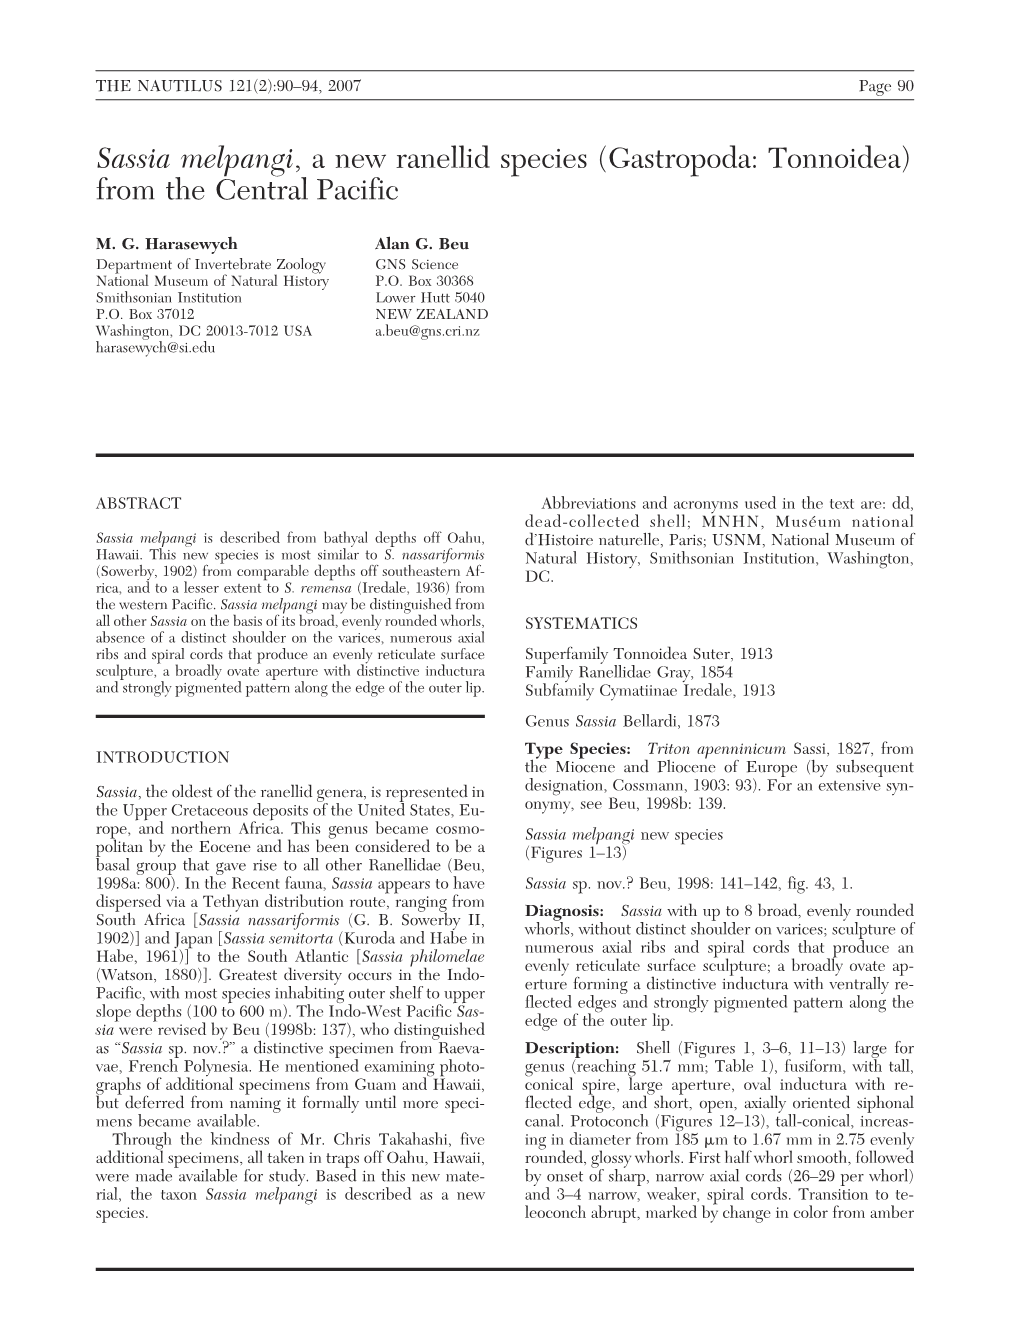 Sassia Melpangi, a New Ranellid Species (Gastropoda: Tonnoidea) from the Central Pacific